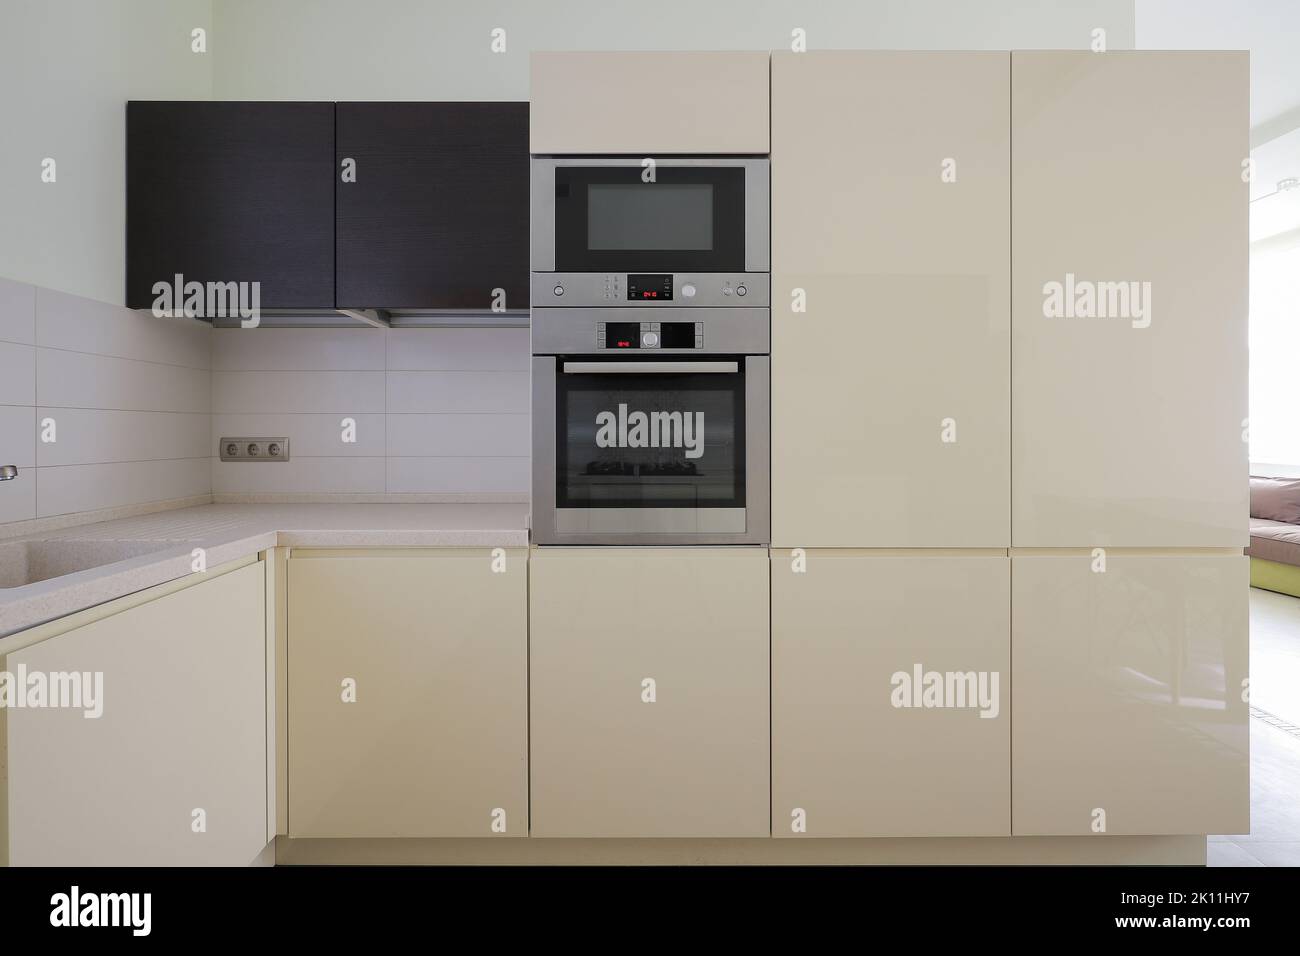 Modern microwave and oven built-in kitchen furniture Stock Photo